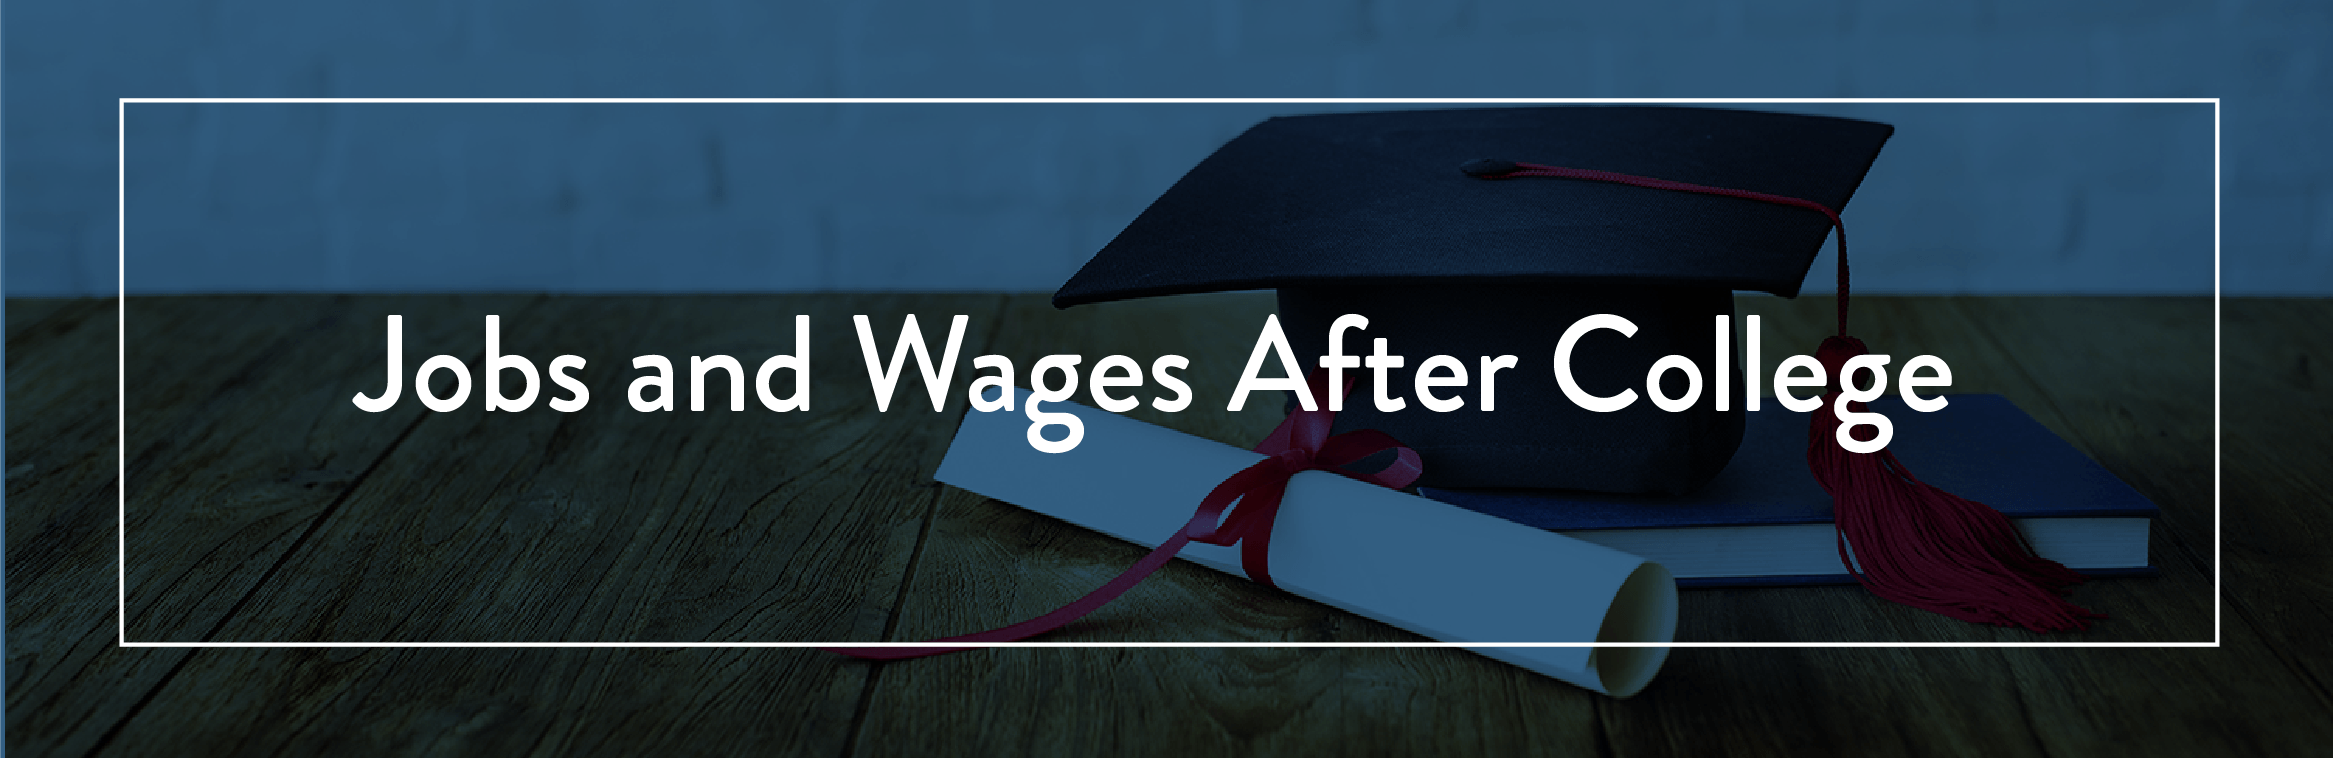 Jobs and wages after college